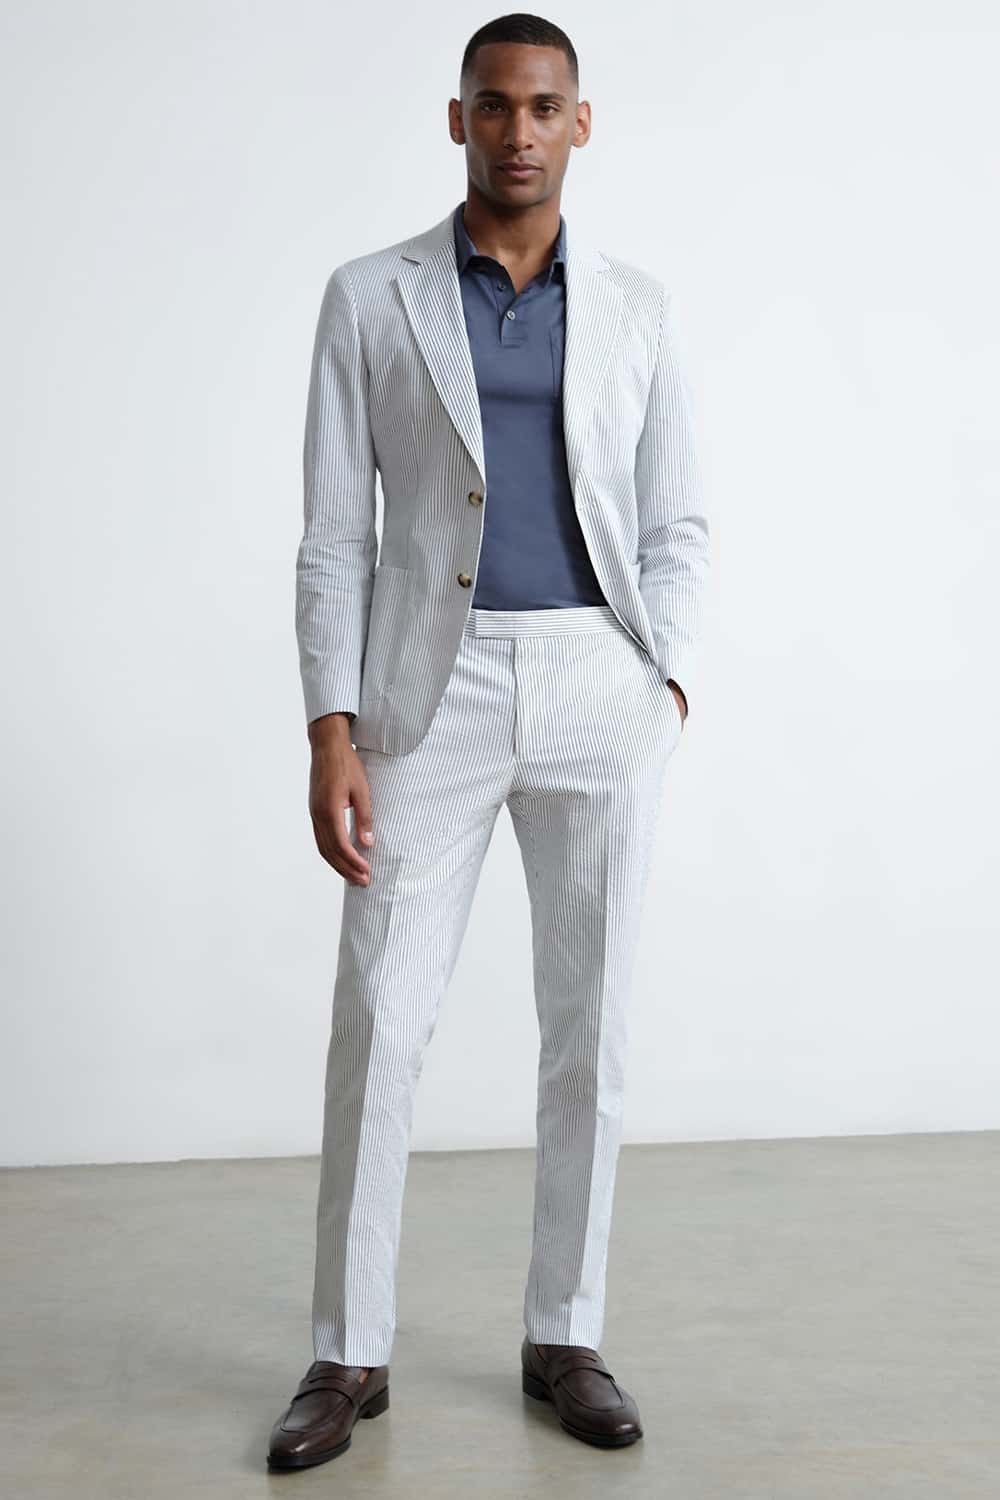 Men's Spring Outfits For Men Outfits: 100s Of Stylish Looks For 2023